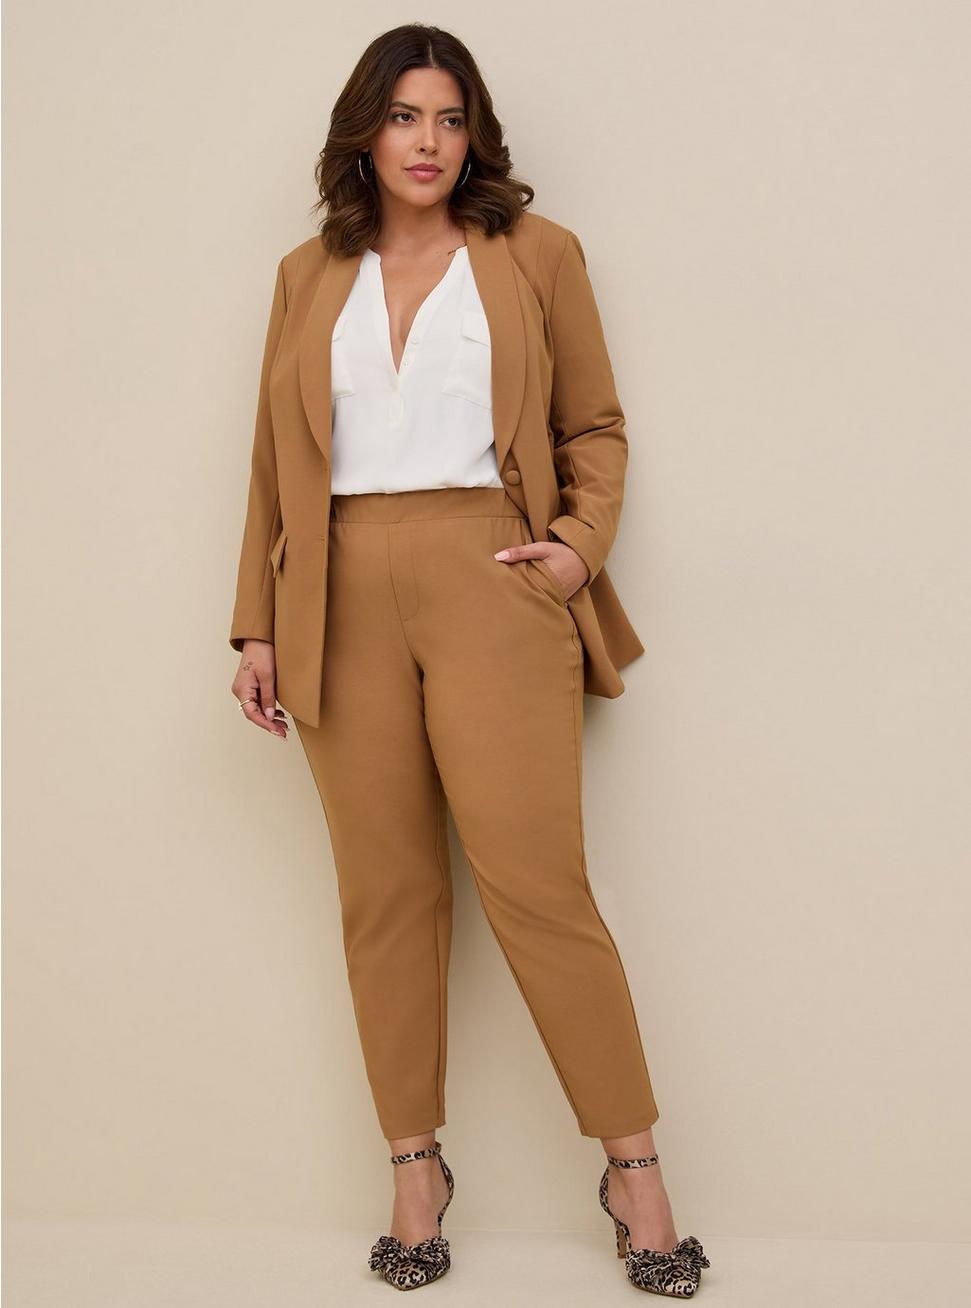 Pull-On Relaxed Taper Studio Refined Crepe High-Rise Pant, BROWN, hi-res